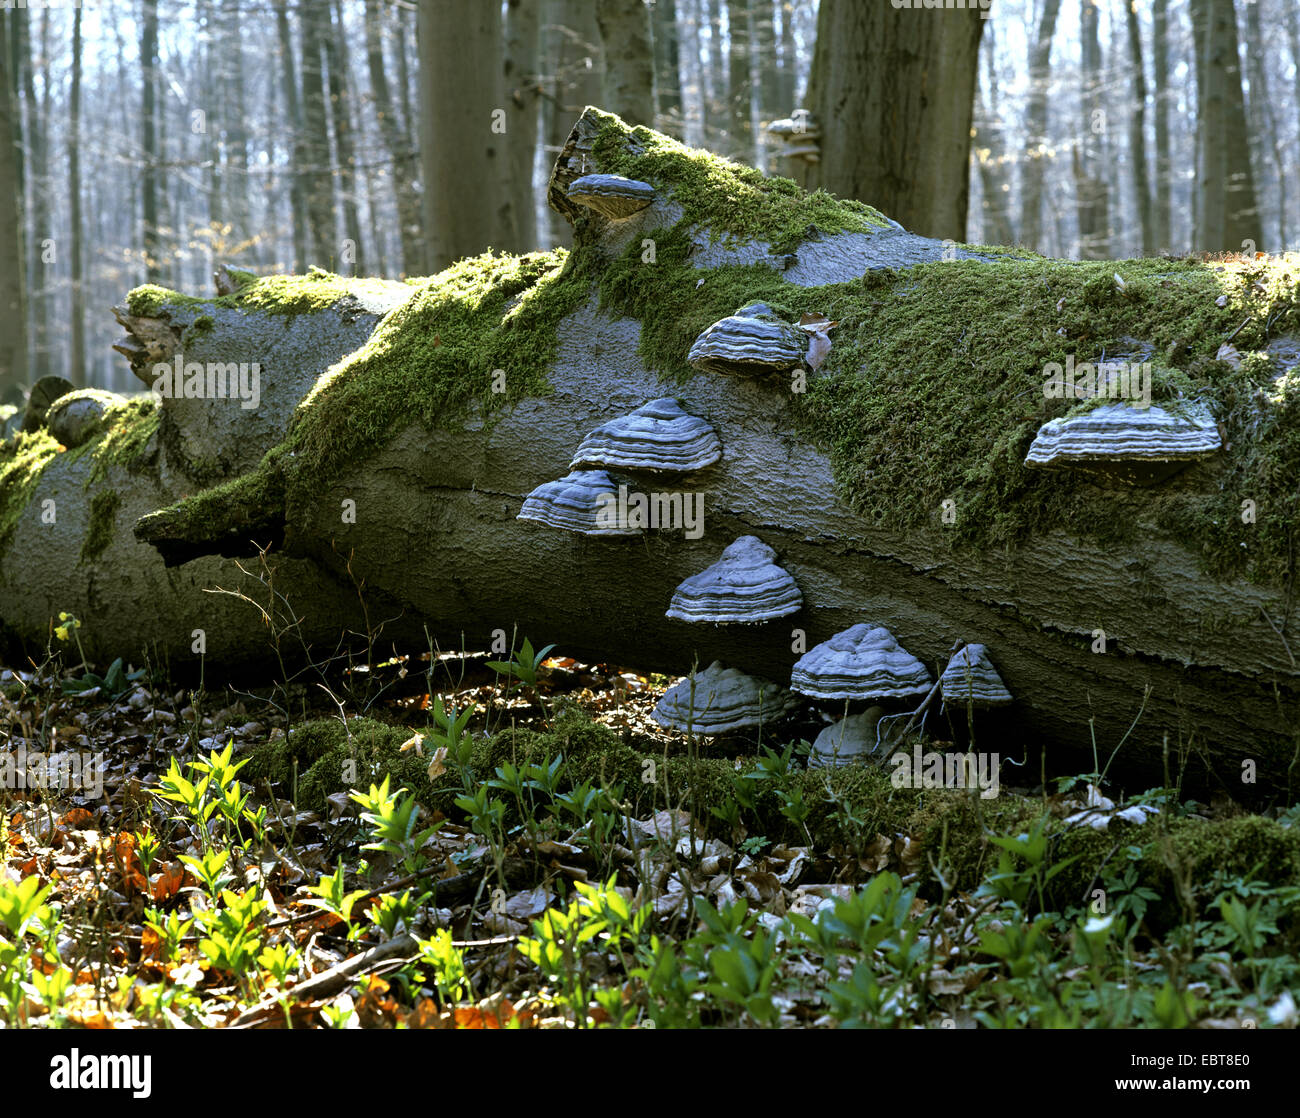 common beech (Fagus sylvatica), dead tree trunk with hoof fungus, Fomes fomentarius, Germany, Thueringen, Hainich National Park Stock Photo